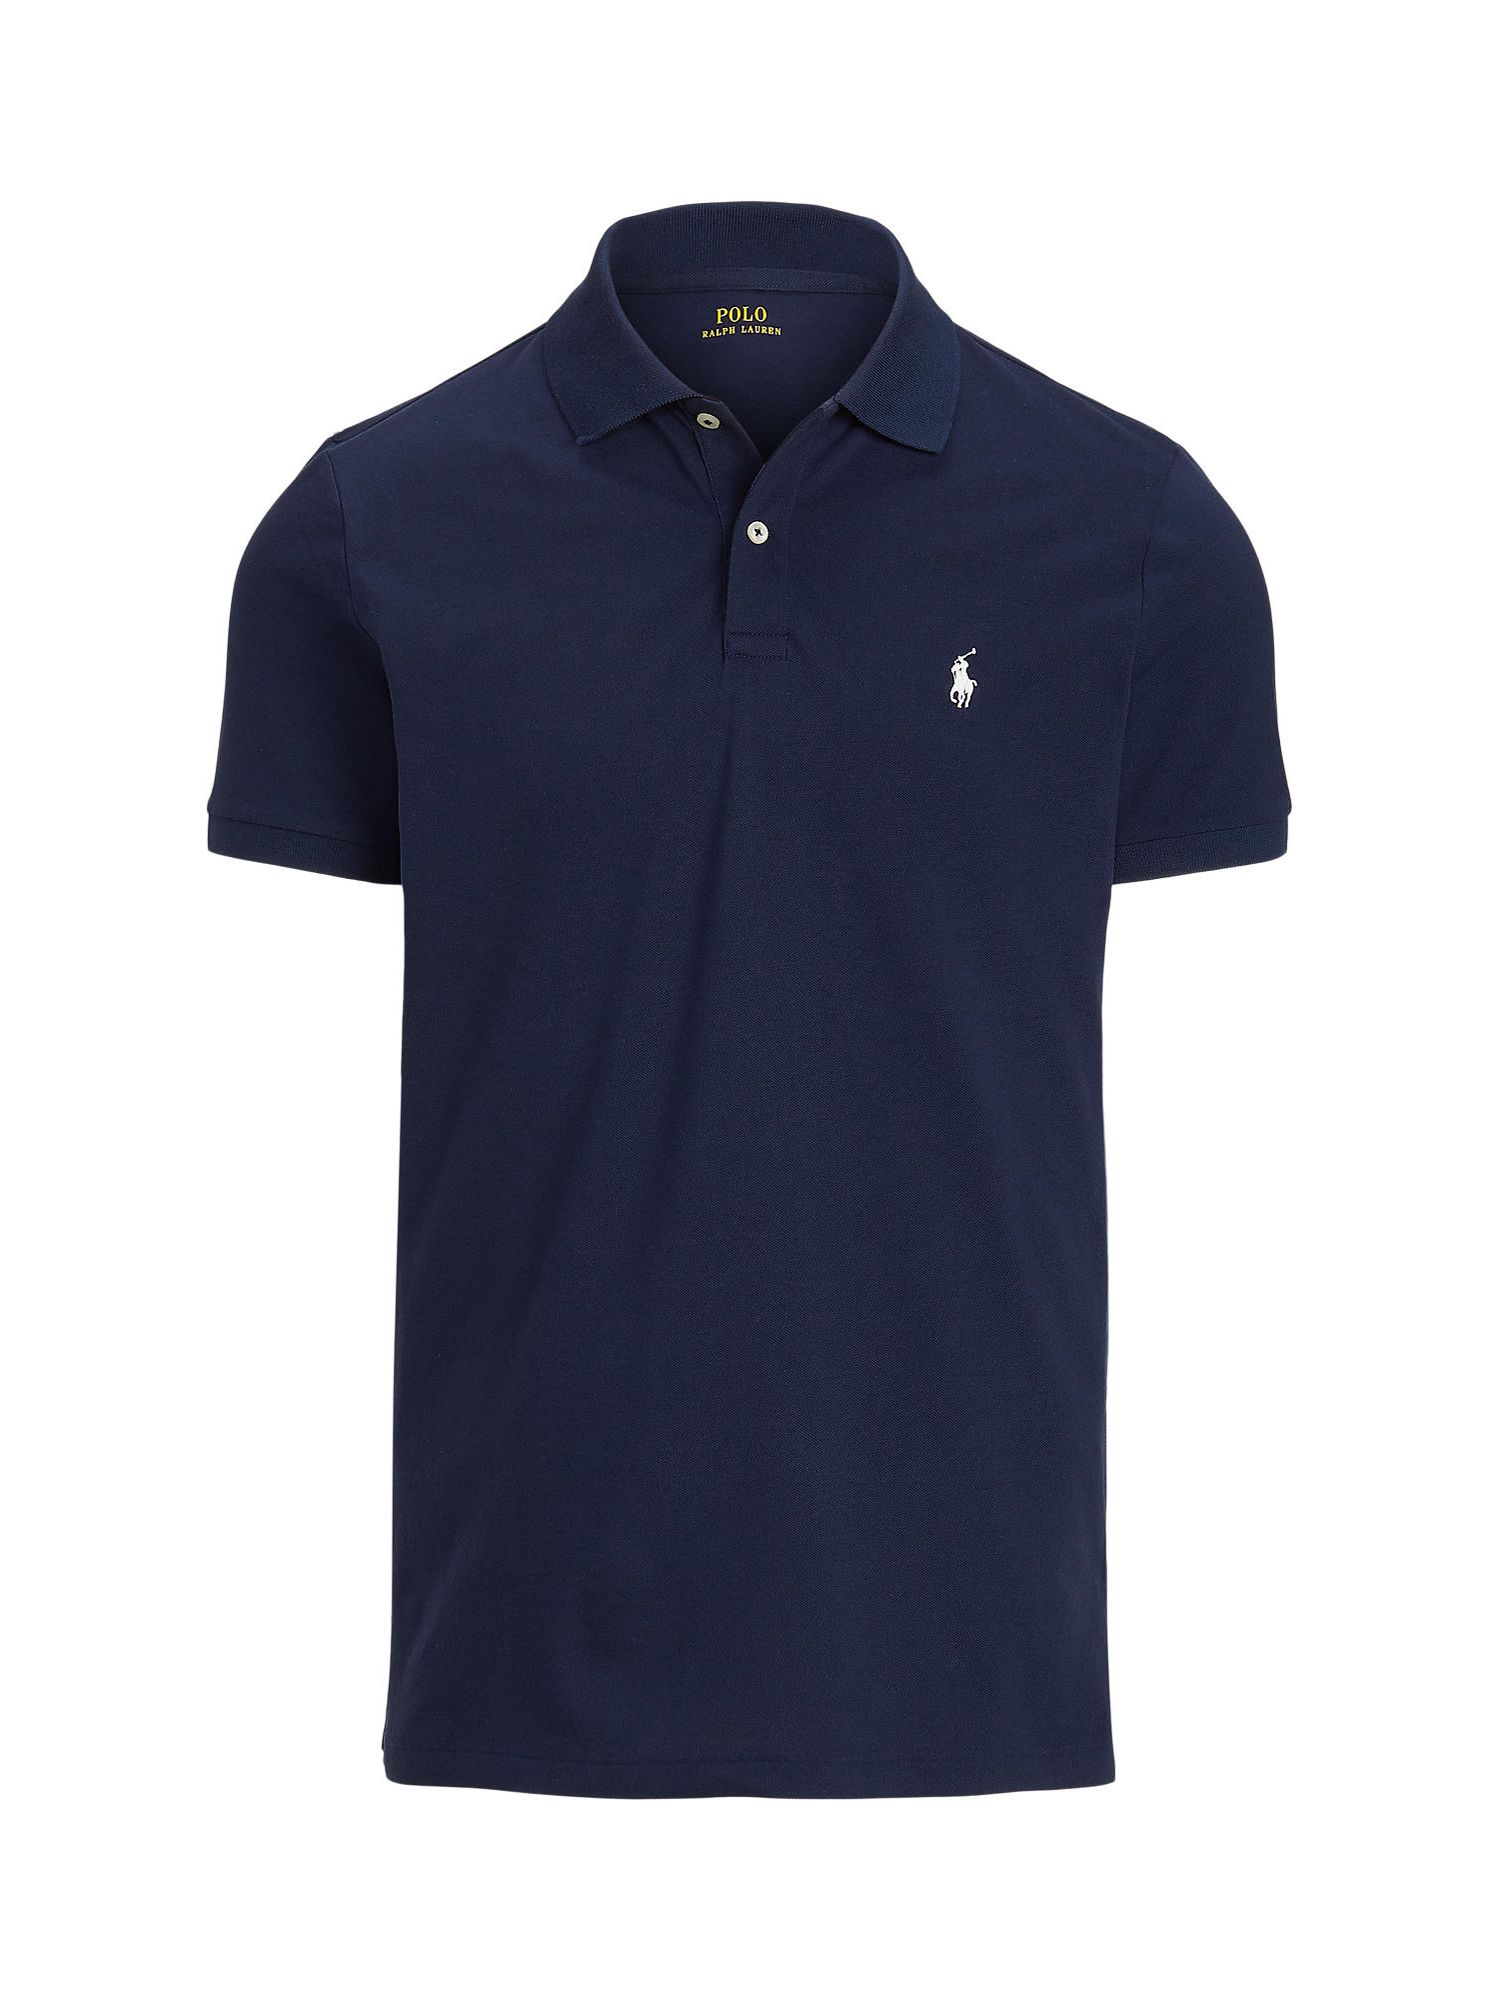 Polo Golf by Ralph Lauren Polo Shirt, French Navy at John Lewis & Partners